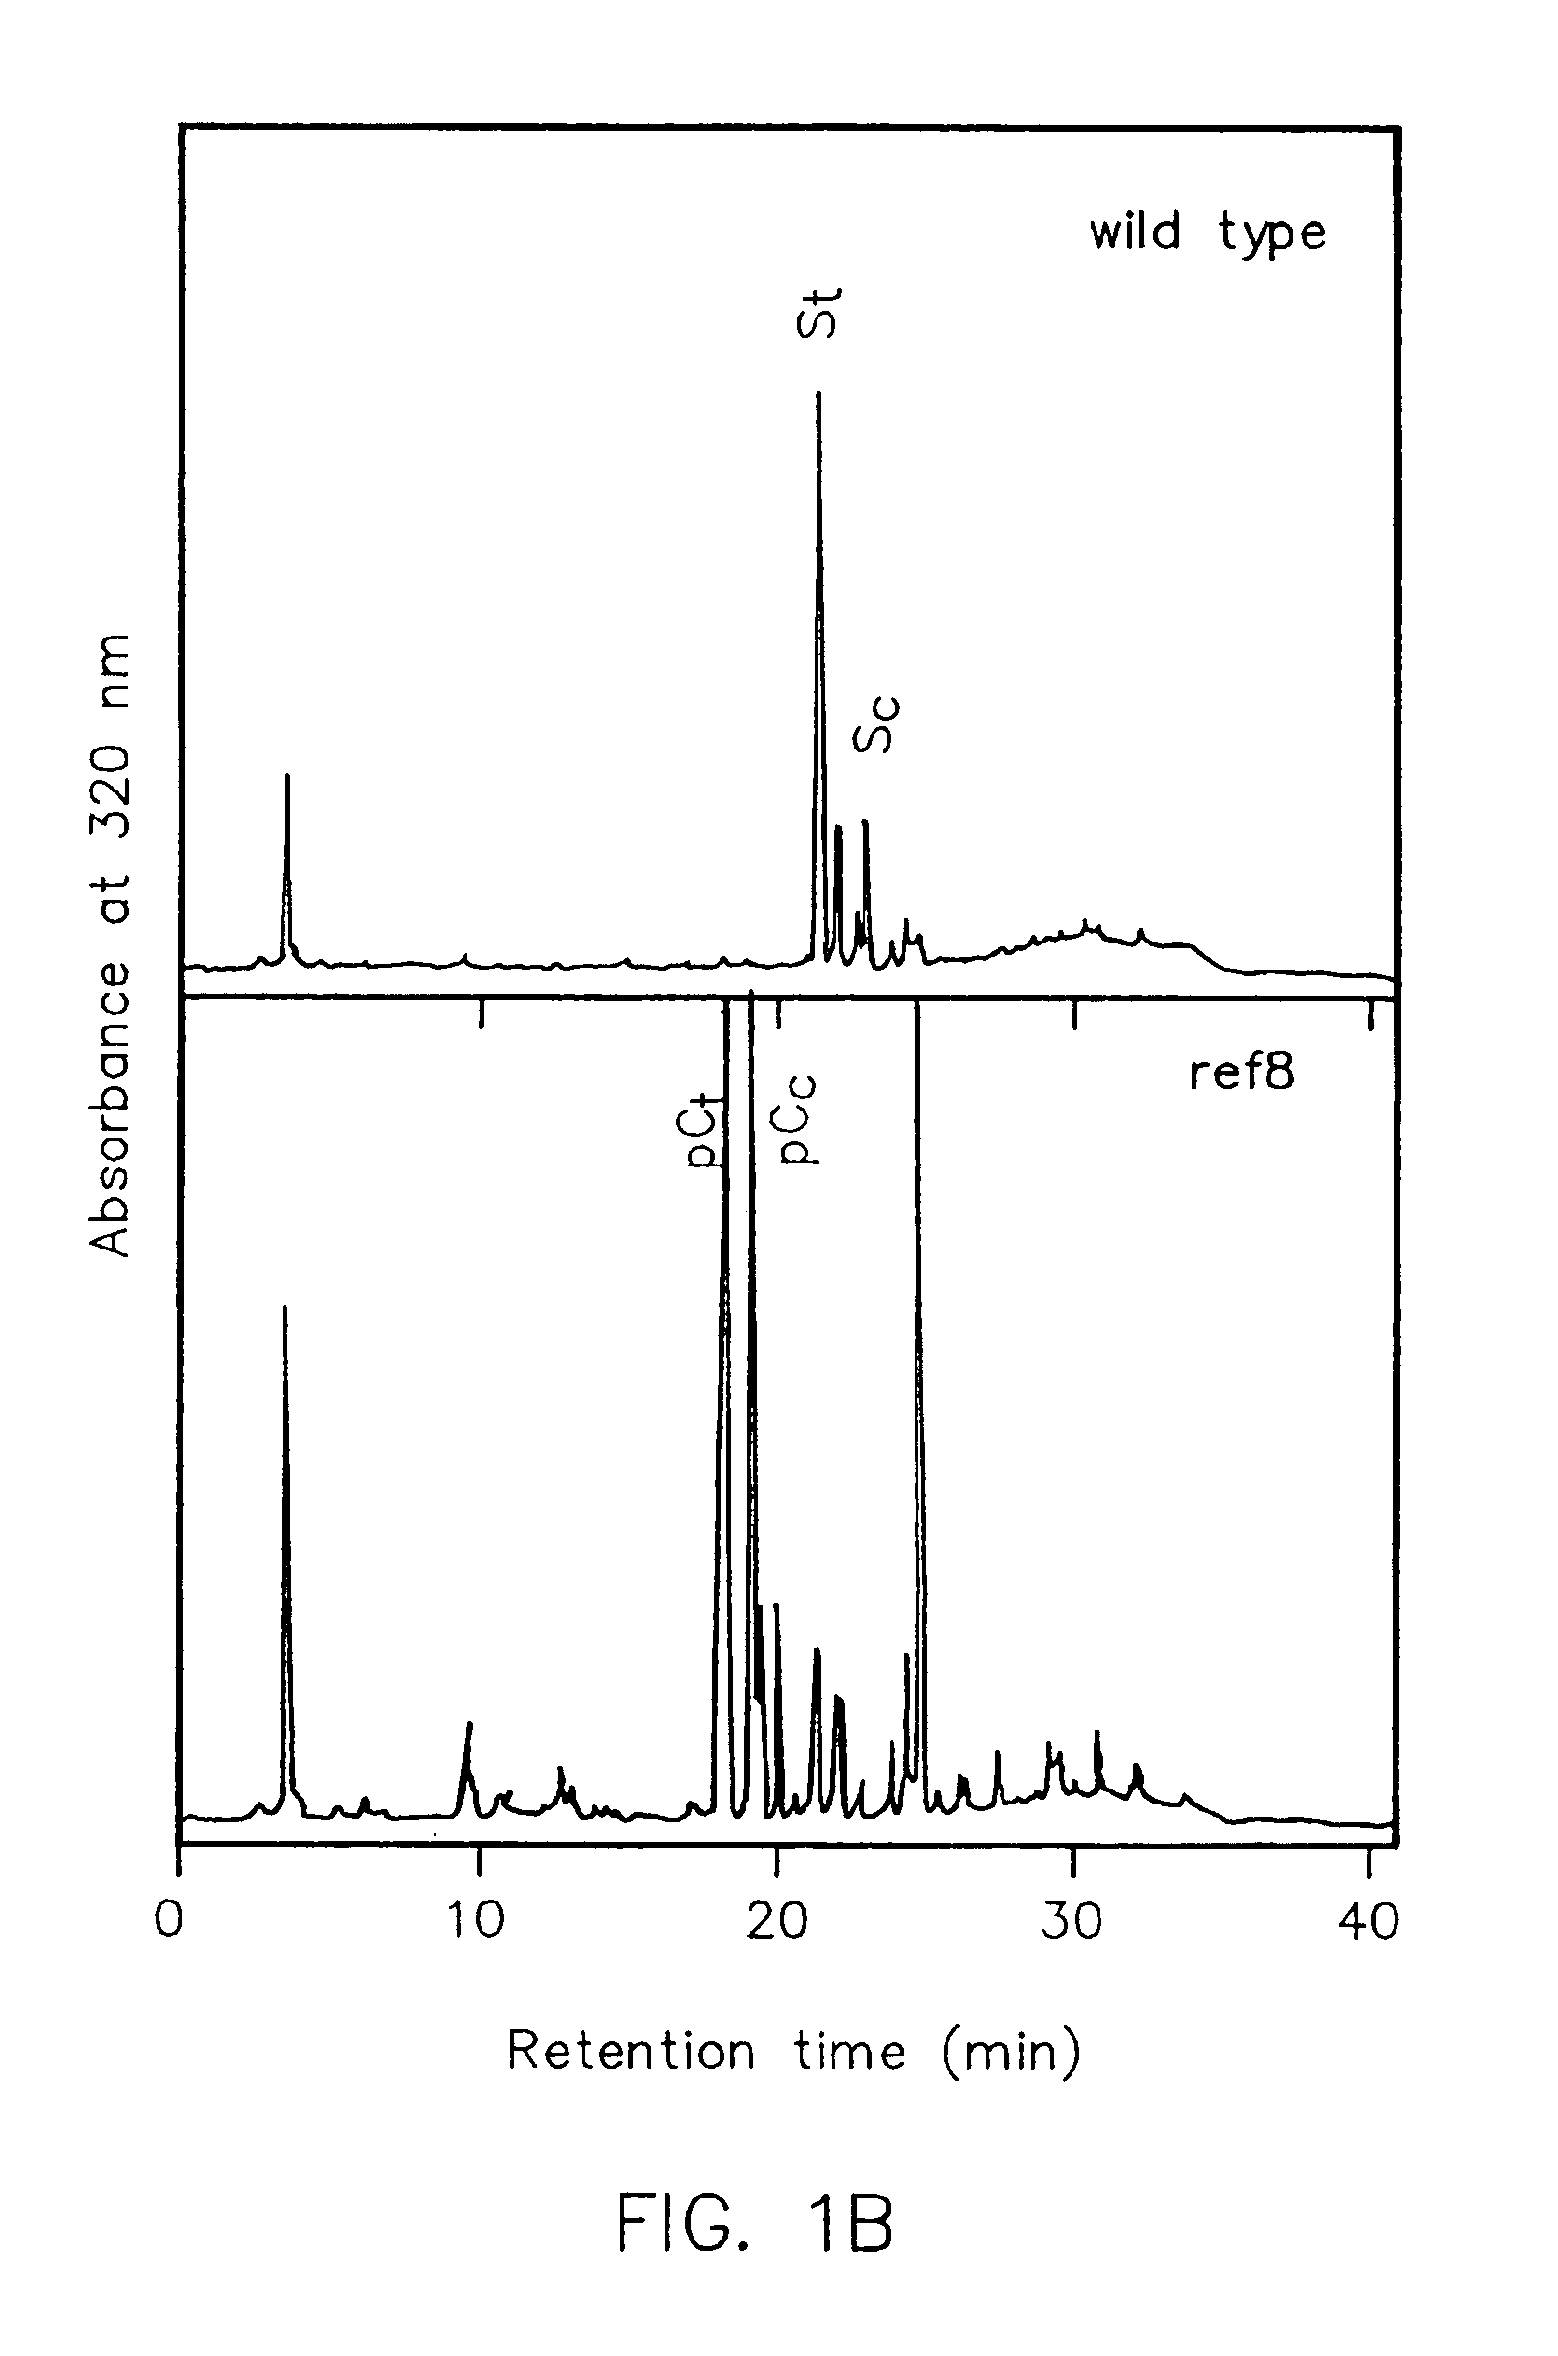 Genes encoding p-coumarate 3-hydroxylase (C3H) and methods of use